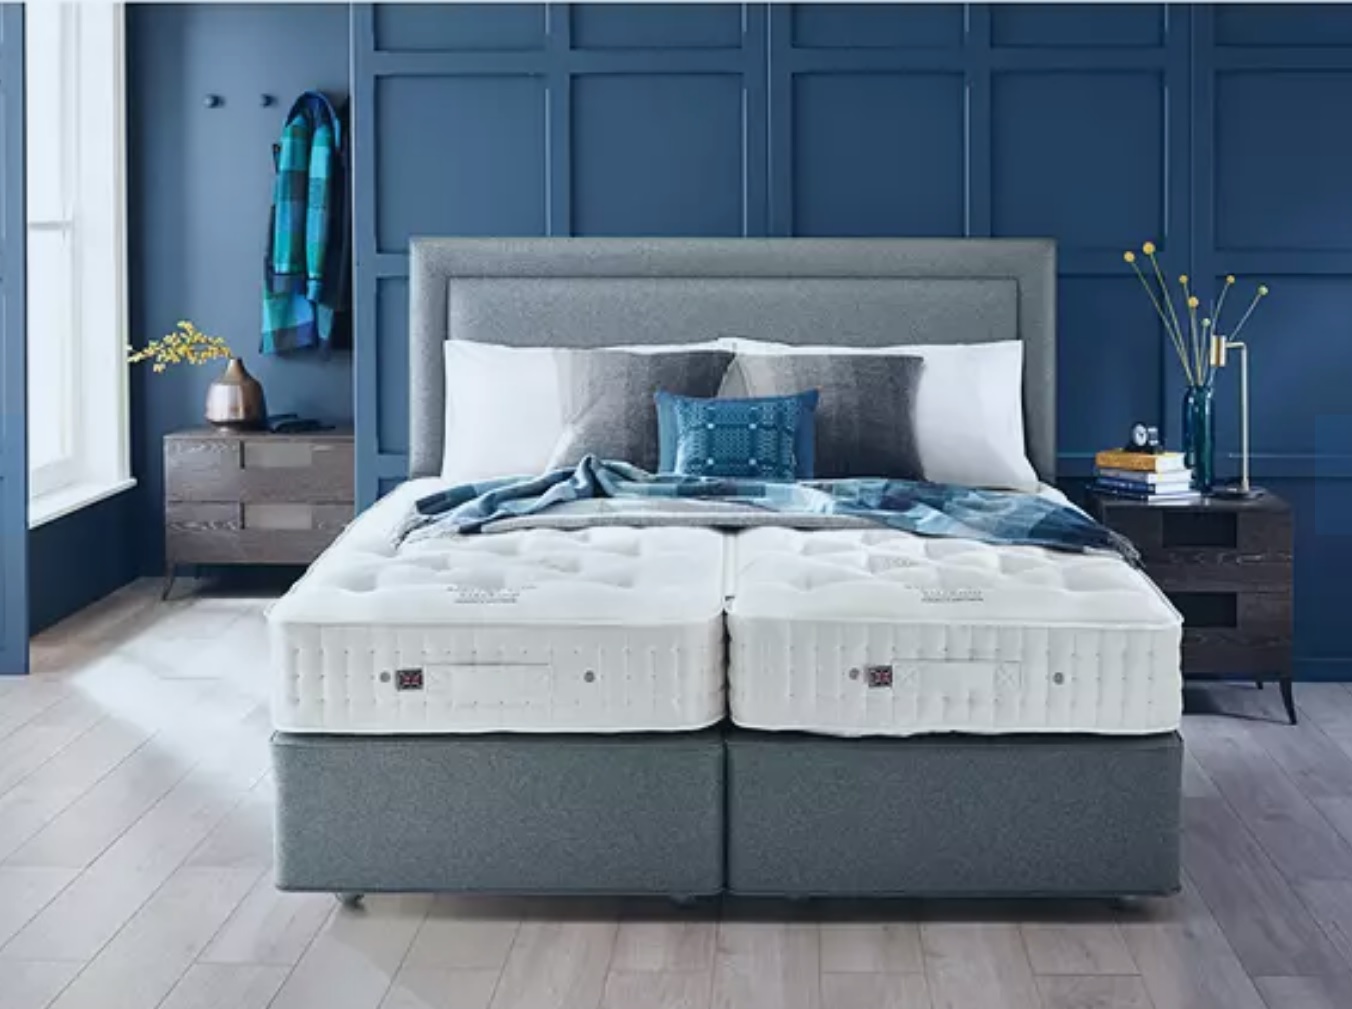 Vispring Zip and Link Super King (2x 90 x 200cm) Hotel Mattress Only with its distinctive - Image 2 of 2